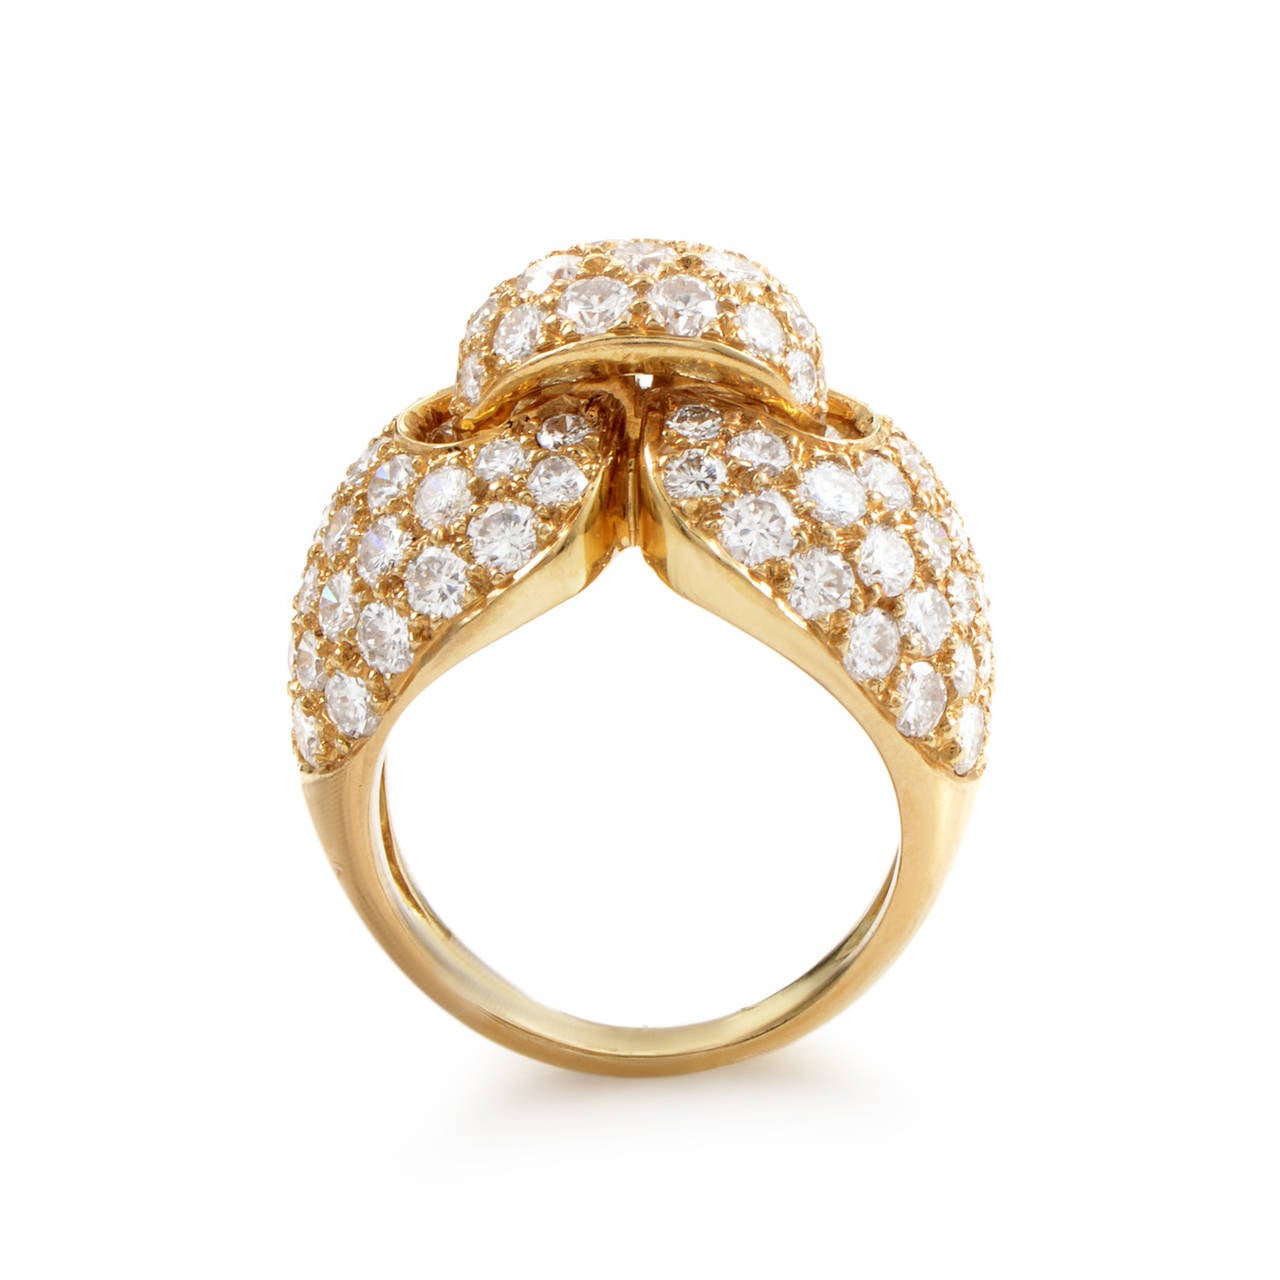 A sophisticated, graceful design from Boucheron made of elegant 18K yellow gold, featuring a unique knotted design and a sumptuous 3.70 carat diamond pave.

Ring Size: 6.0 (51 1/2)